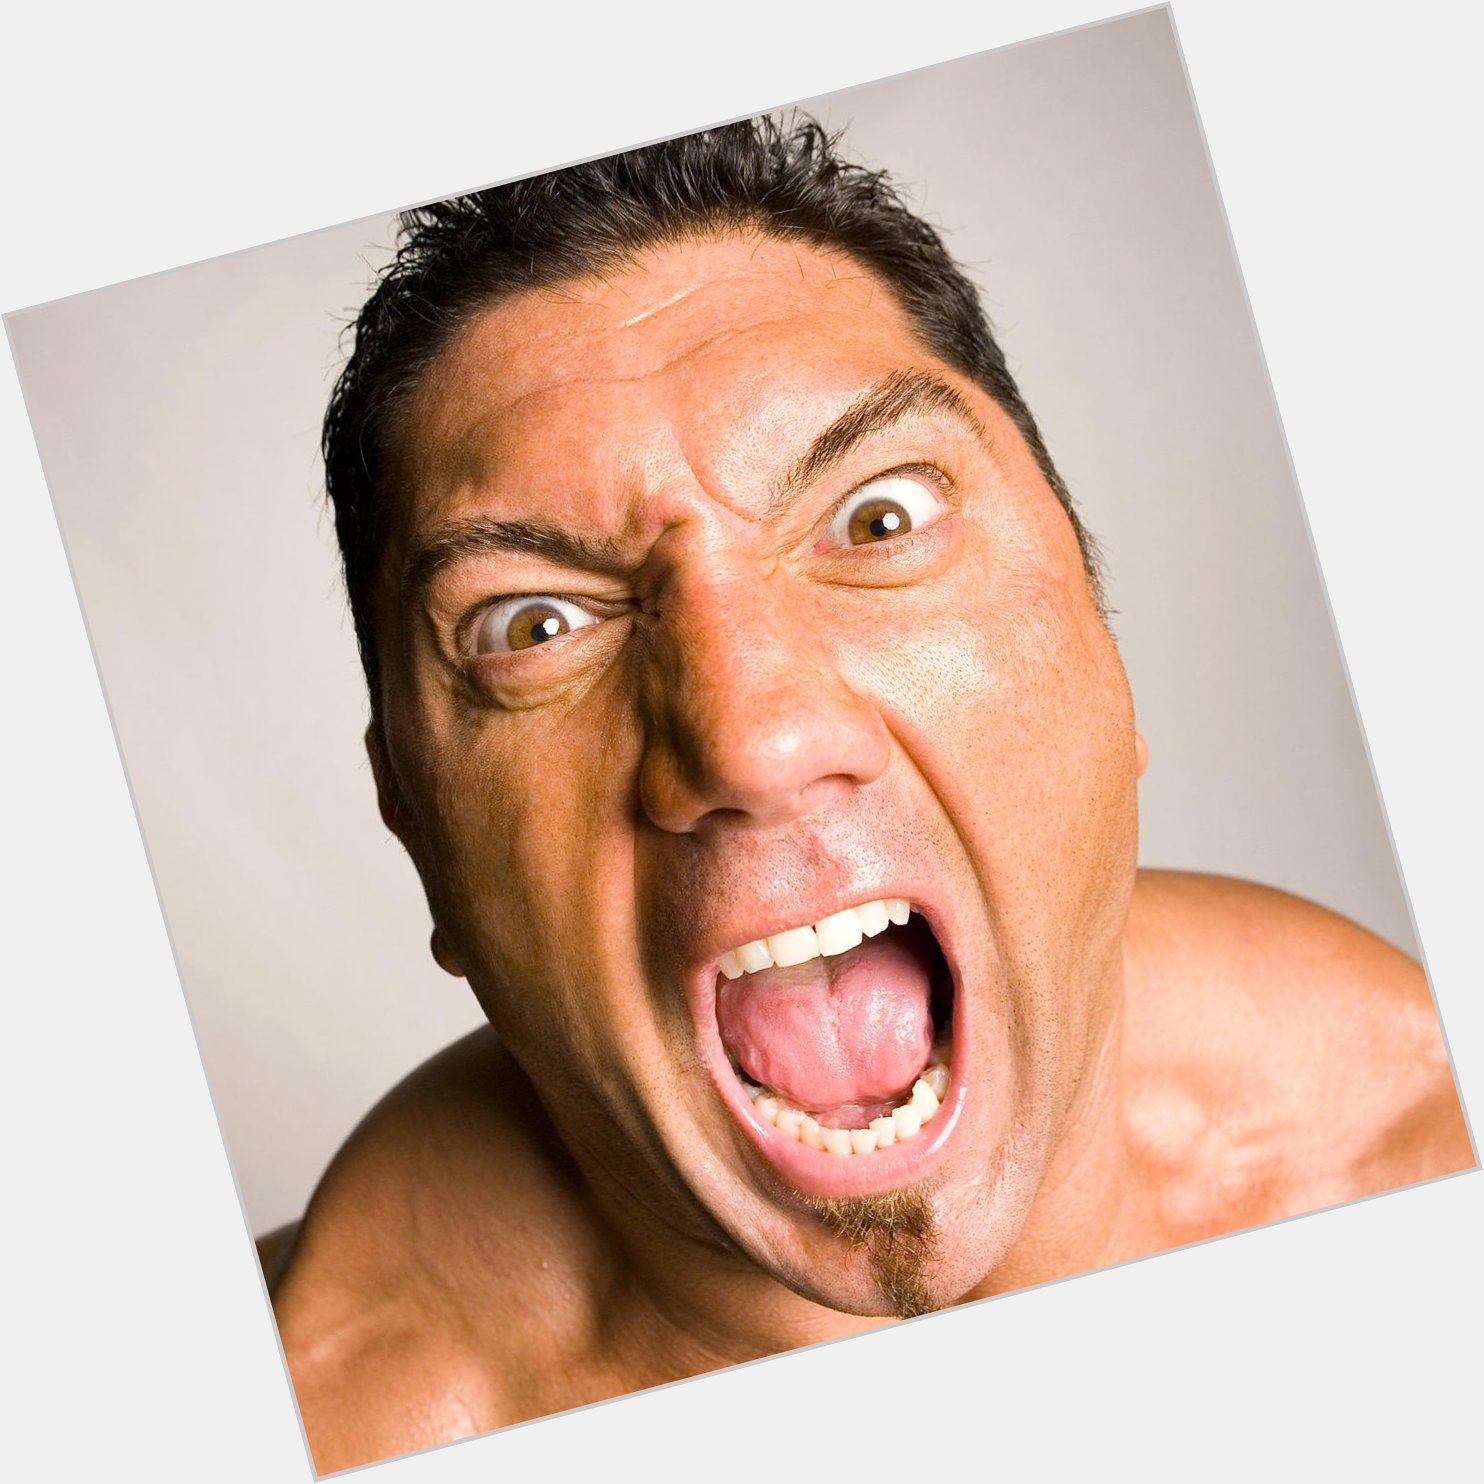 Happy birthday to the one who walks alone inside the pit of danger, The Animal BATISTA!   